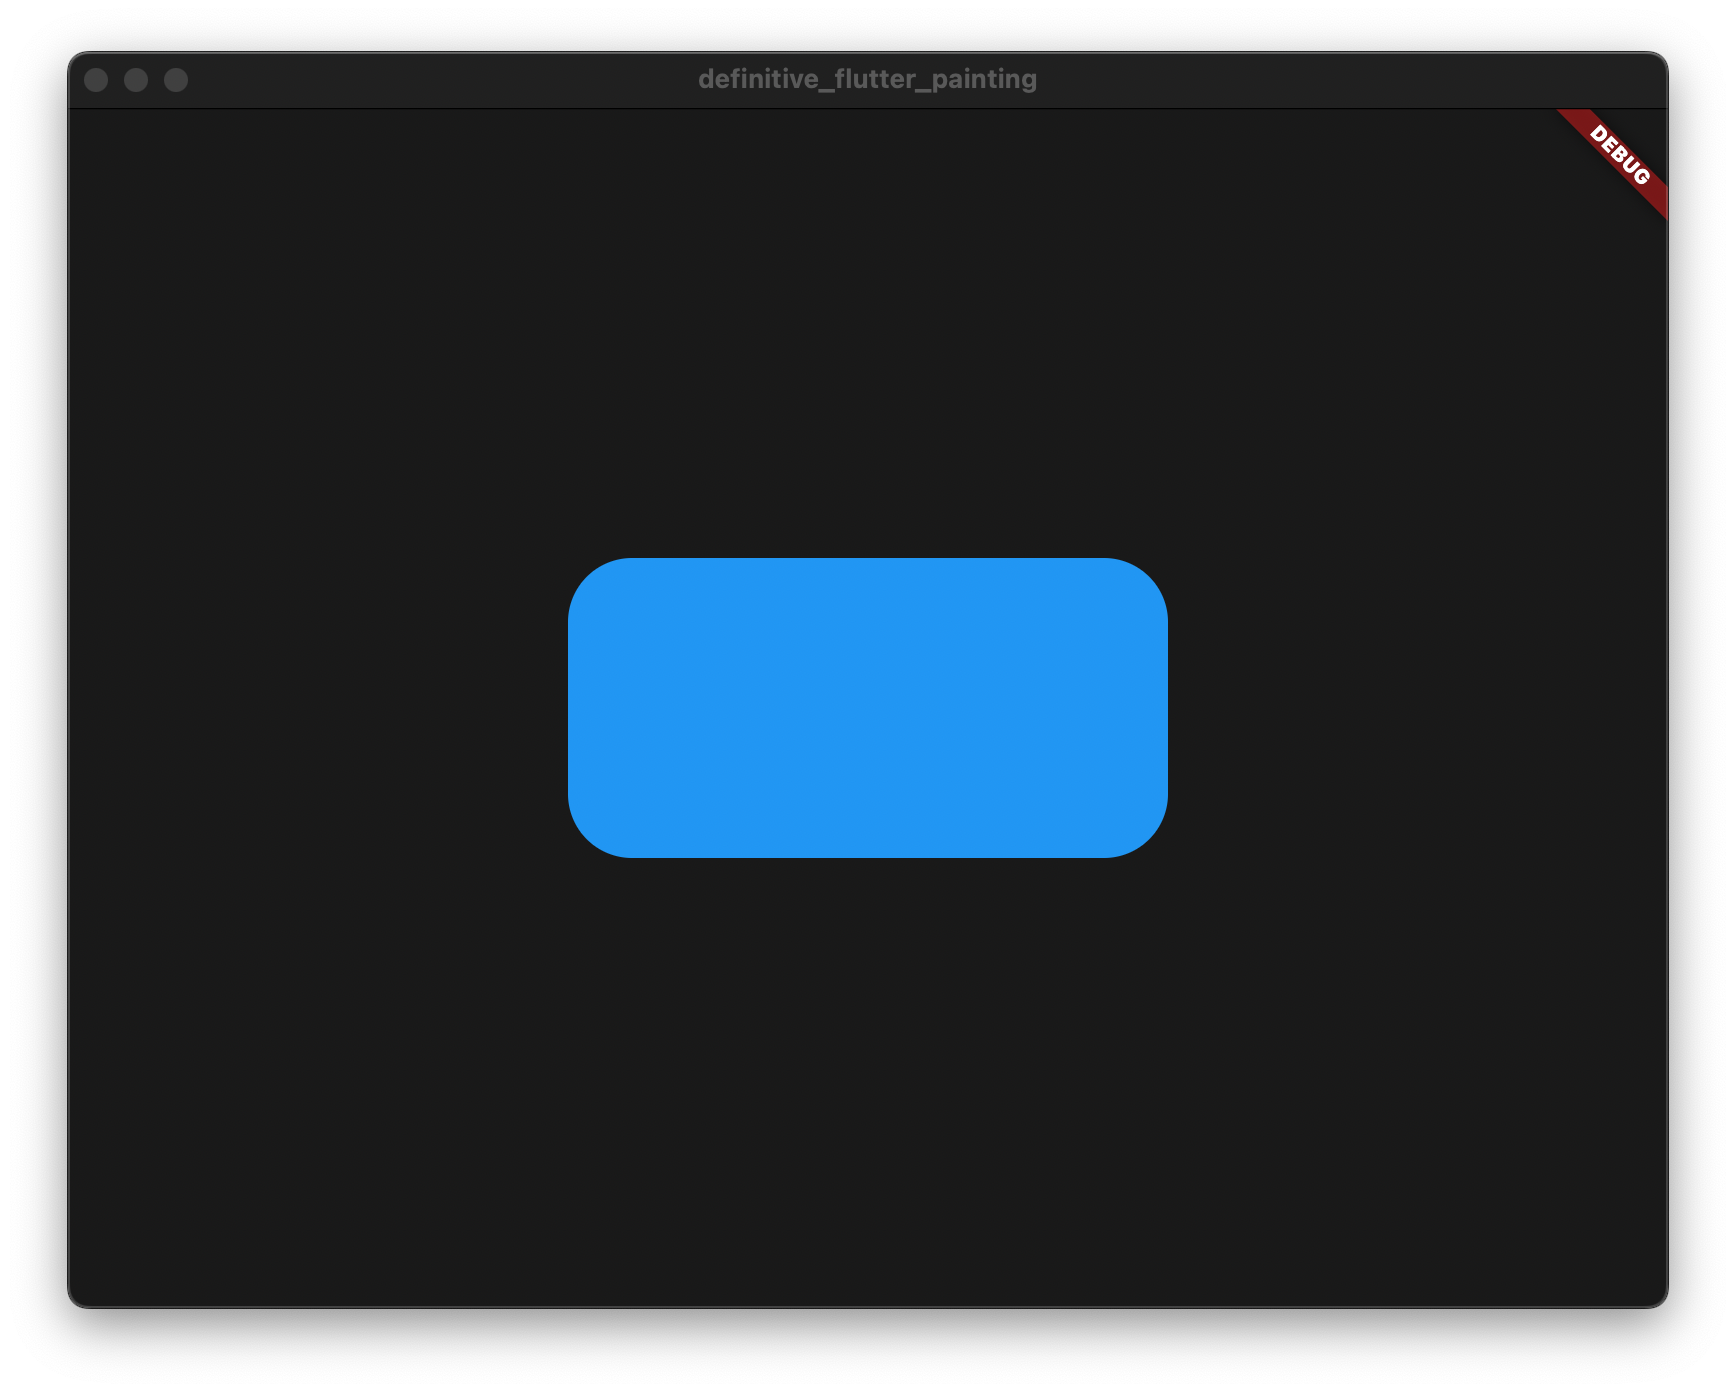 Flutter paint draw rounded rectangles